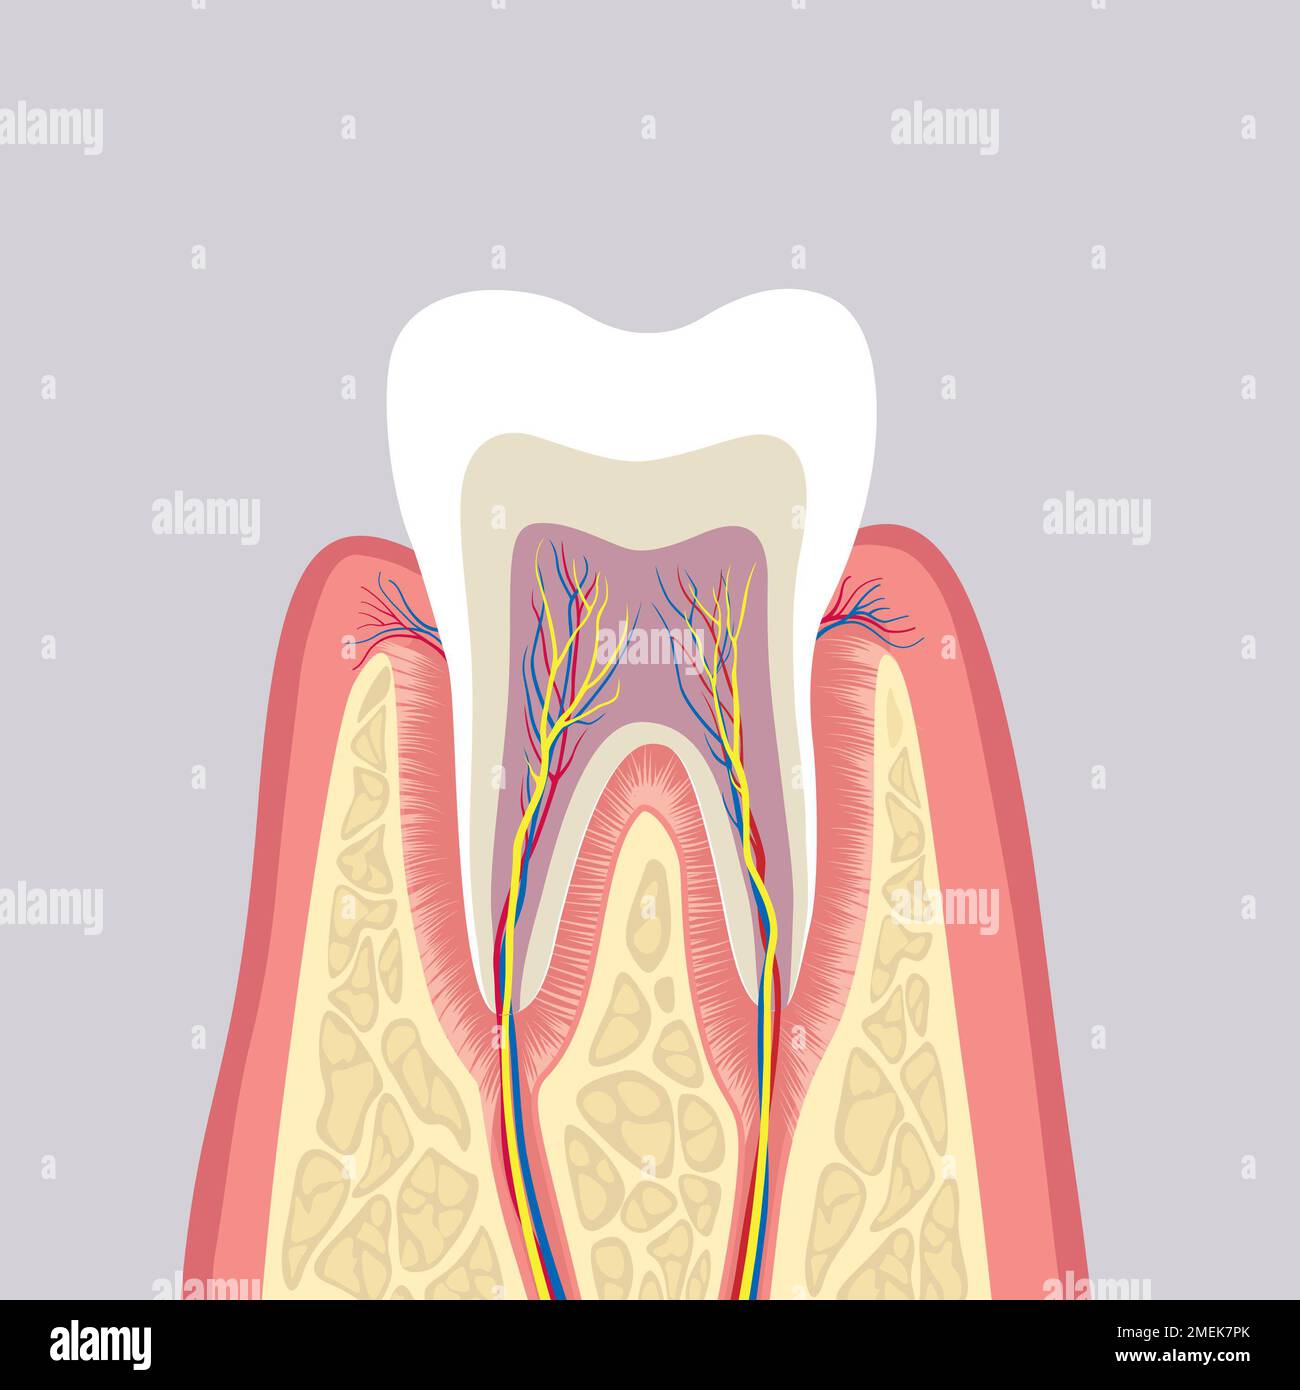 Tooth structure. Anatomy of teeth. Dental medical illustration. Stock Photo